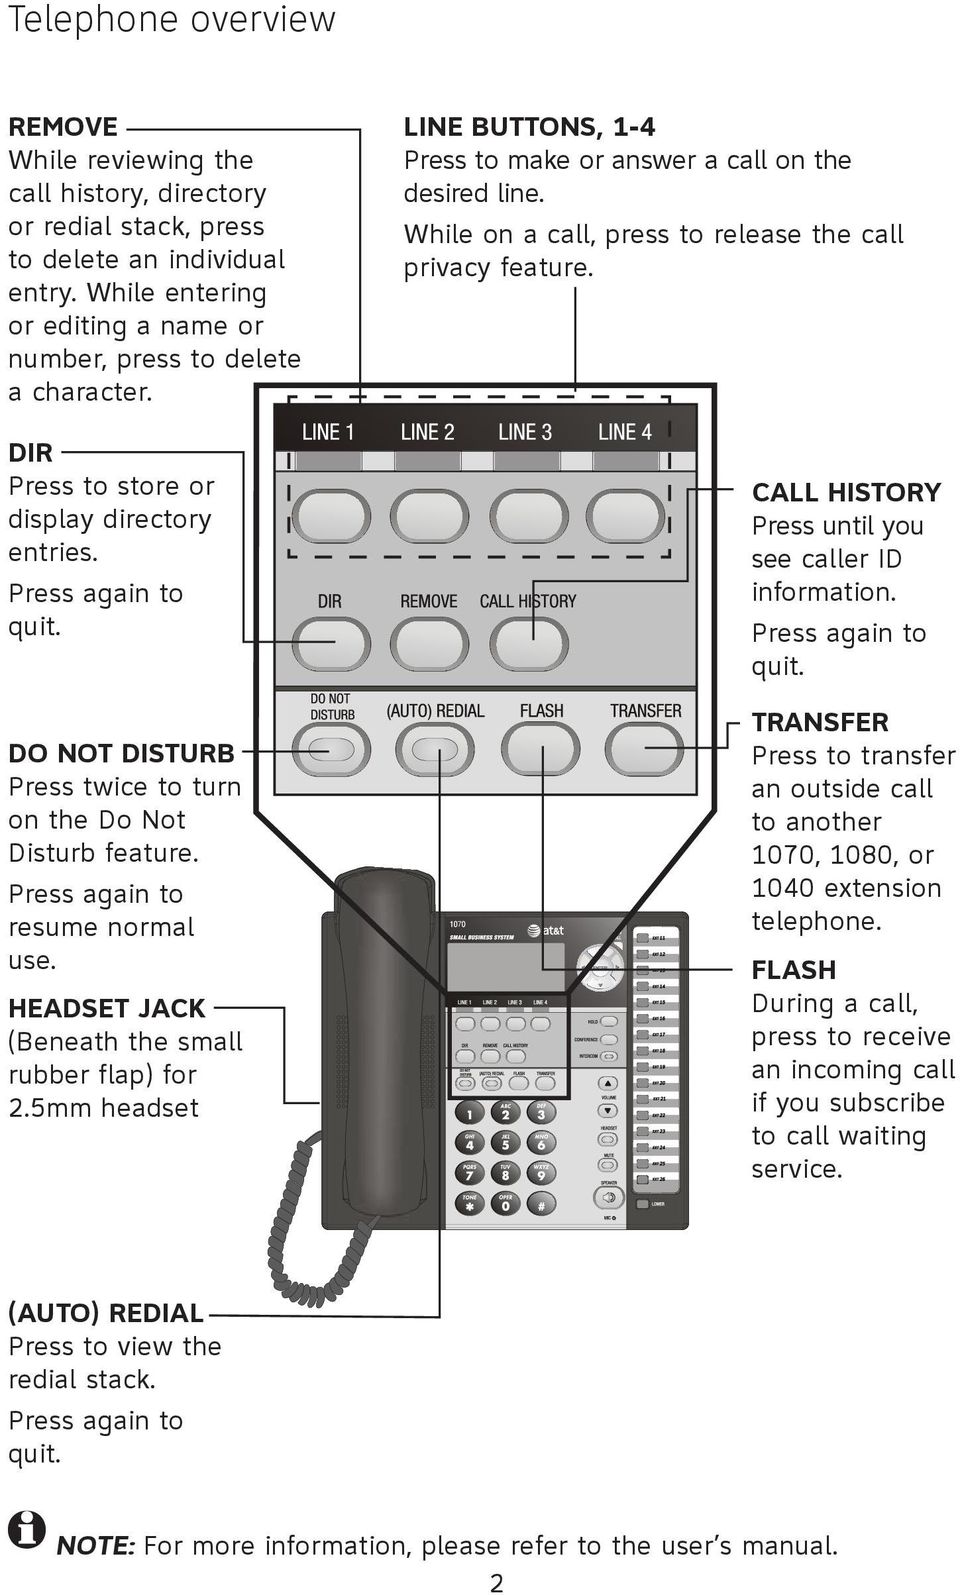 CALL HISTORY Press until you see caller ID information Press again to quit DO NOT DISTURB Press twice to turn on the Do Not Disturb feature Press again to resume normal use HEADSET JACK (Beneath the